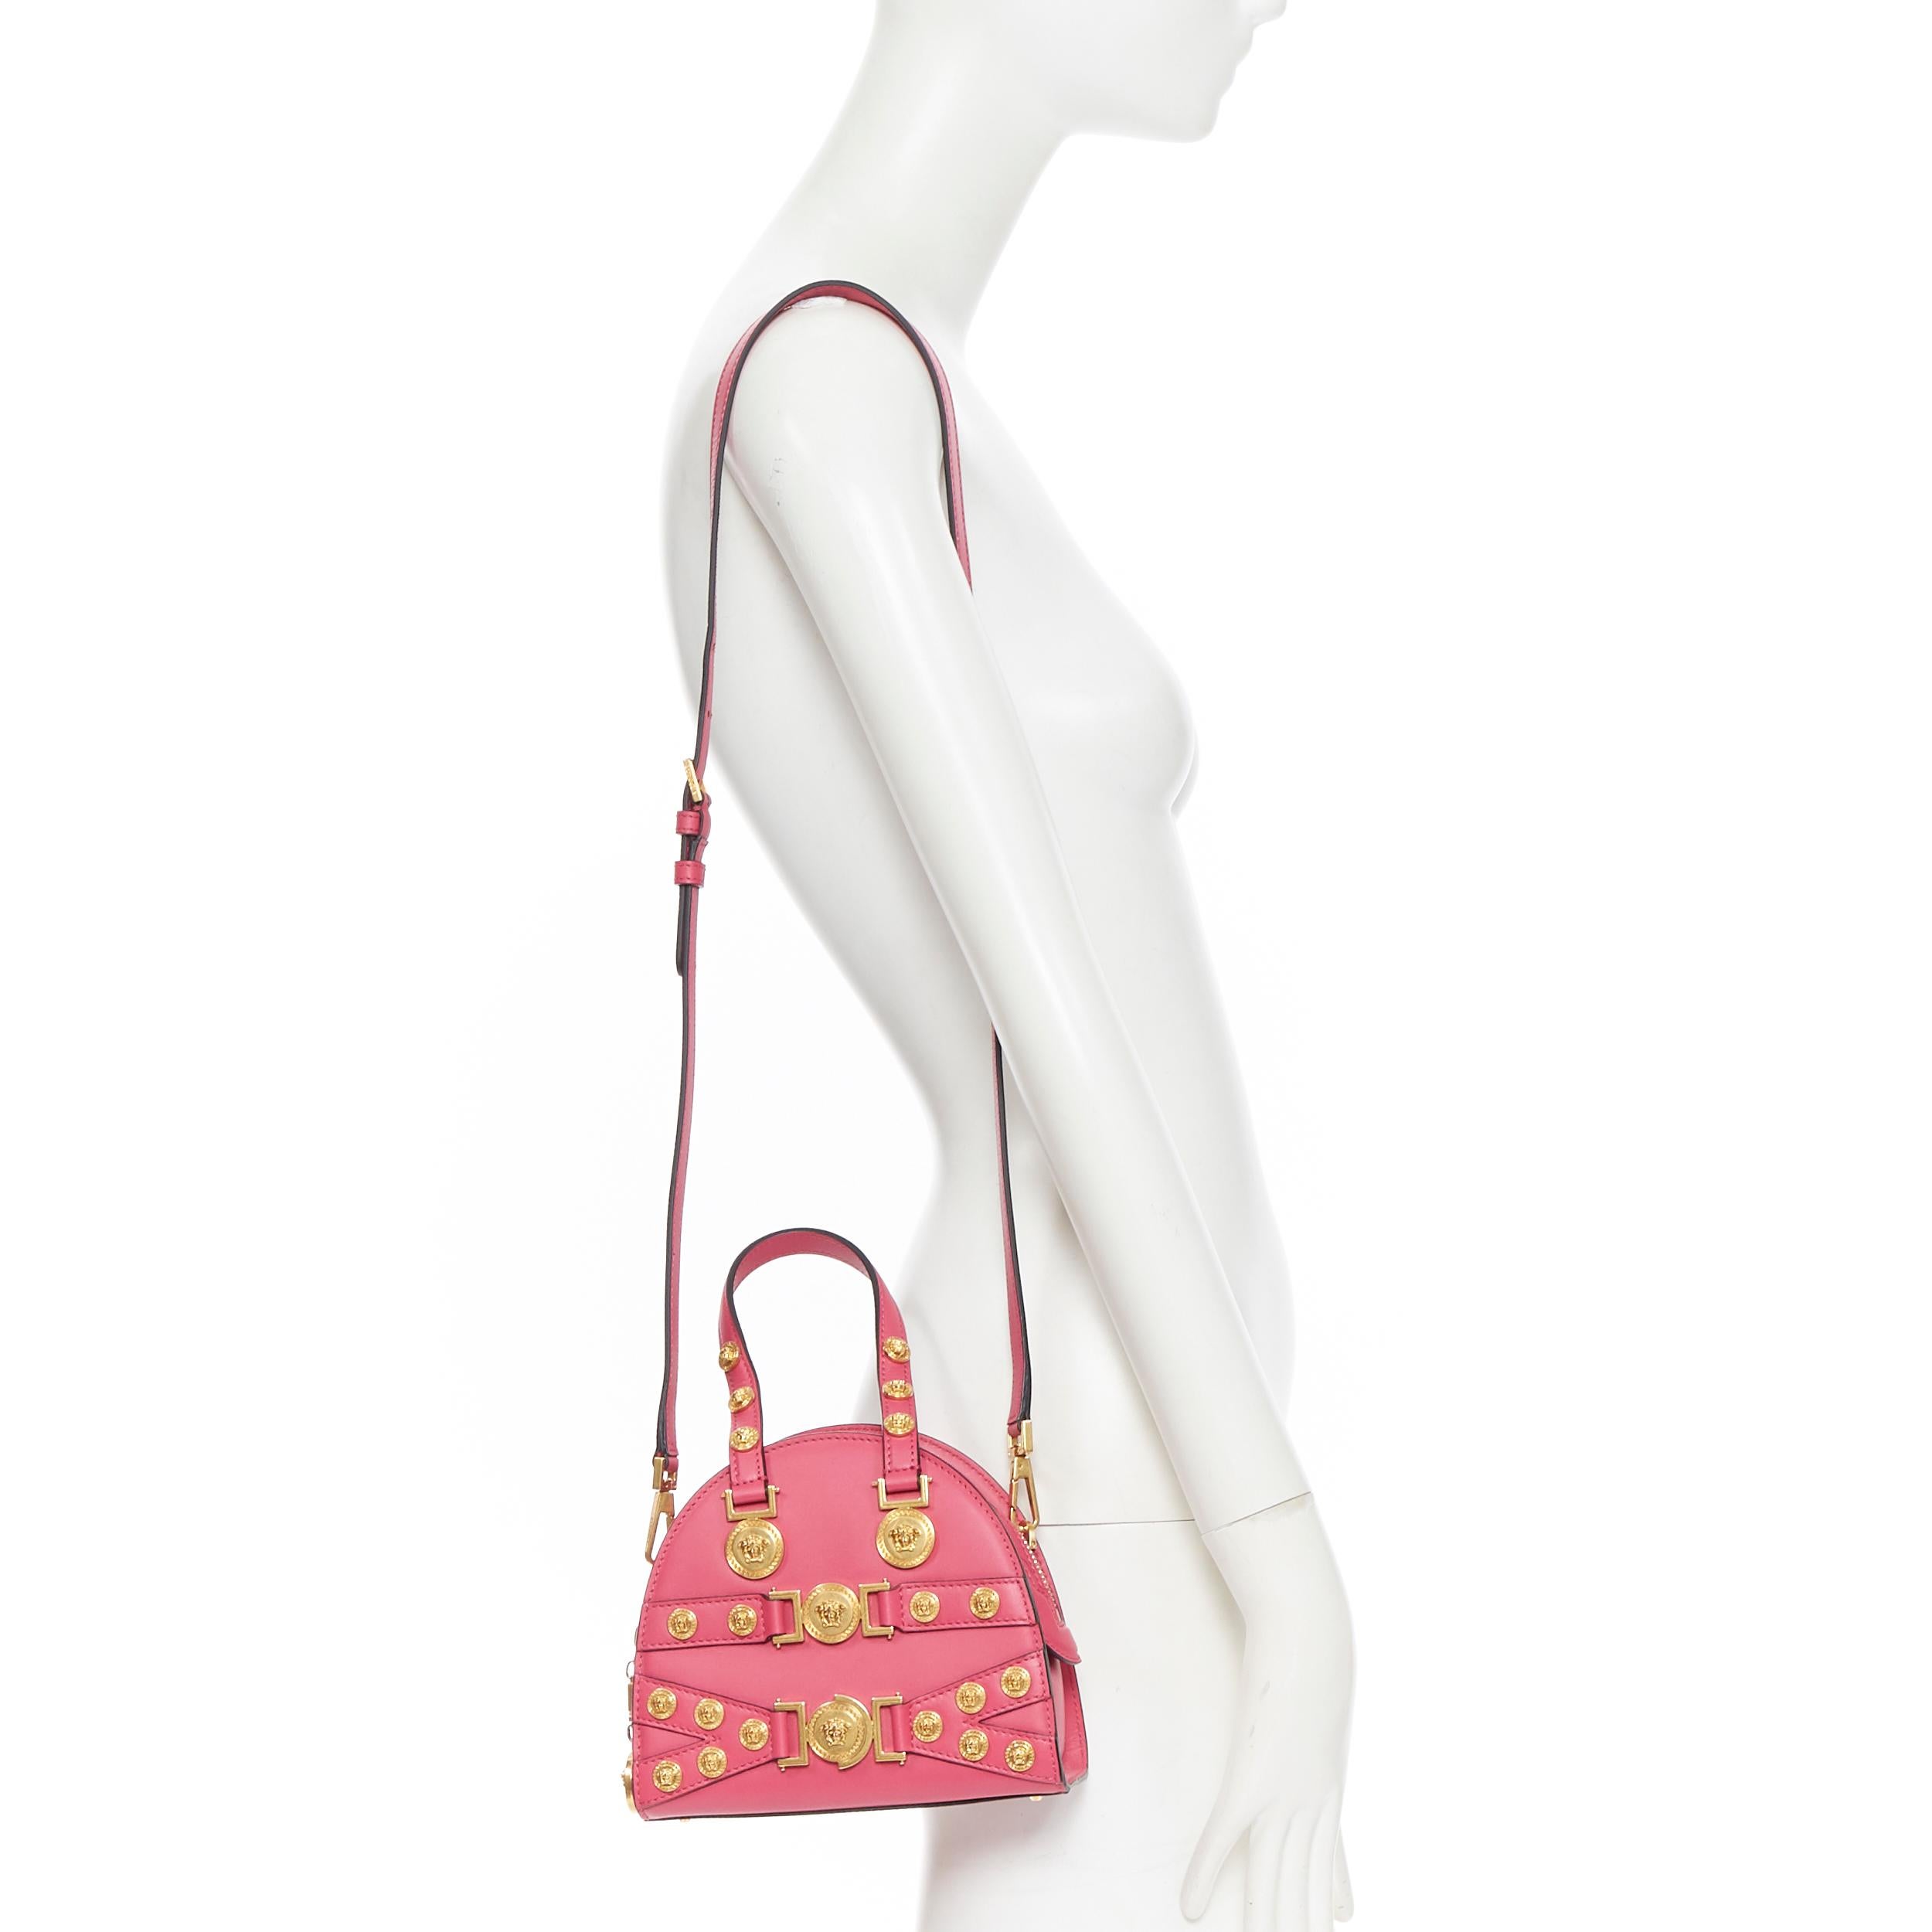 new VERSACE Tribute Medallion Small Bowling fuschia bondage Medusa stud bag
Brand: Versace
Designer: Donatella Versace
Collection: Spring Summer 2018
Model Name / Style: Tribute bowling
Material: Leather
Color: Pink
Pattern: Solid
Closure: Zip
Extra